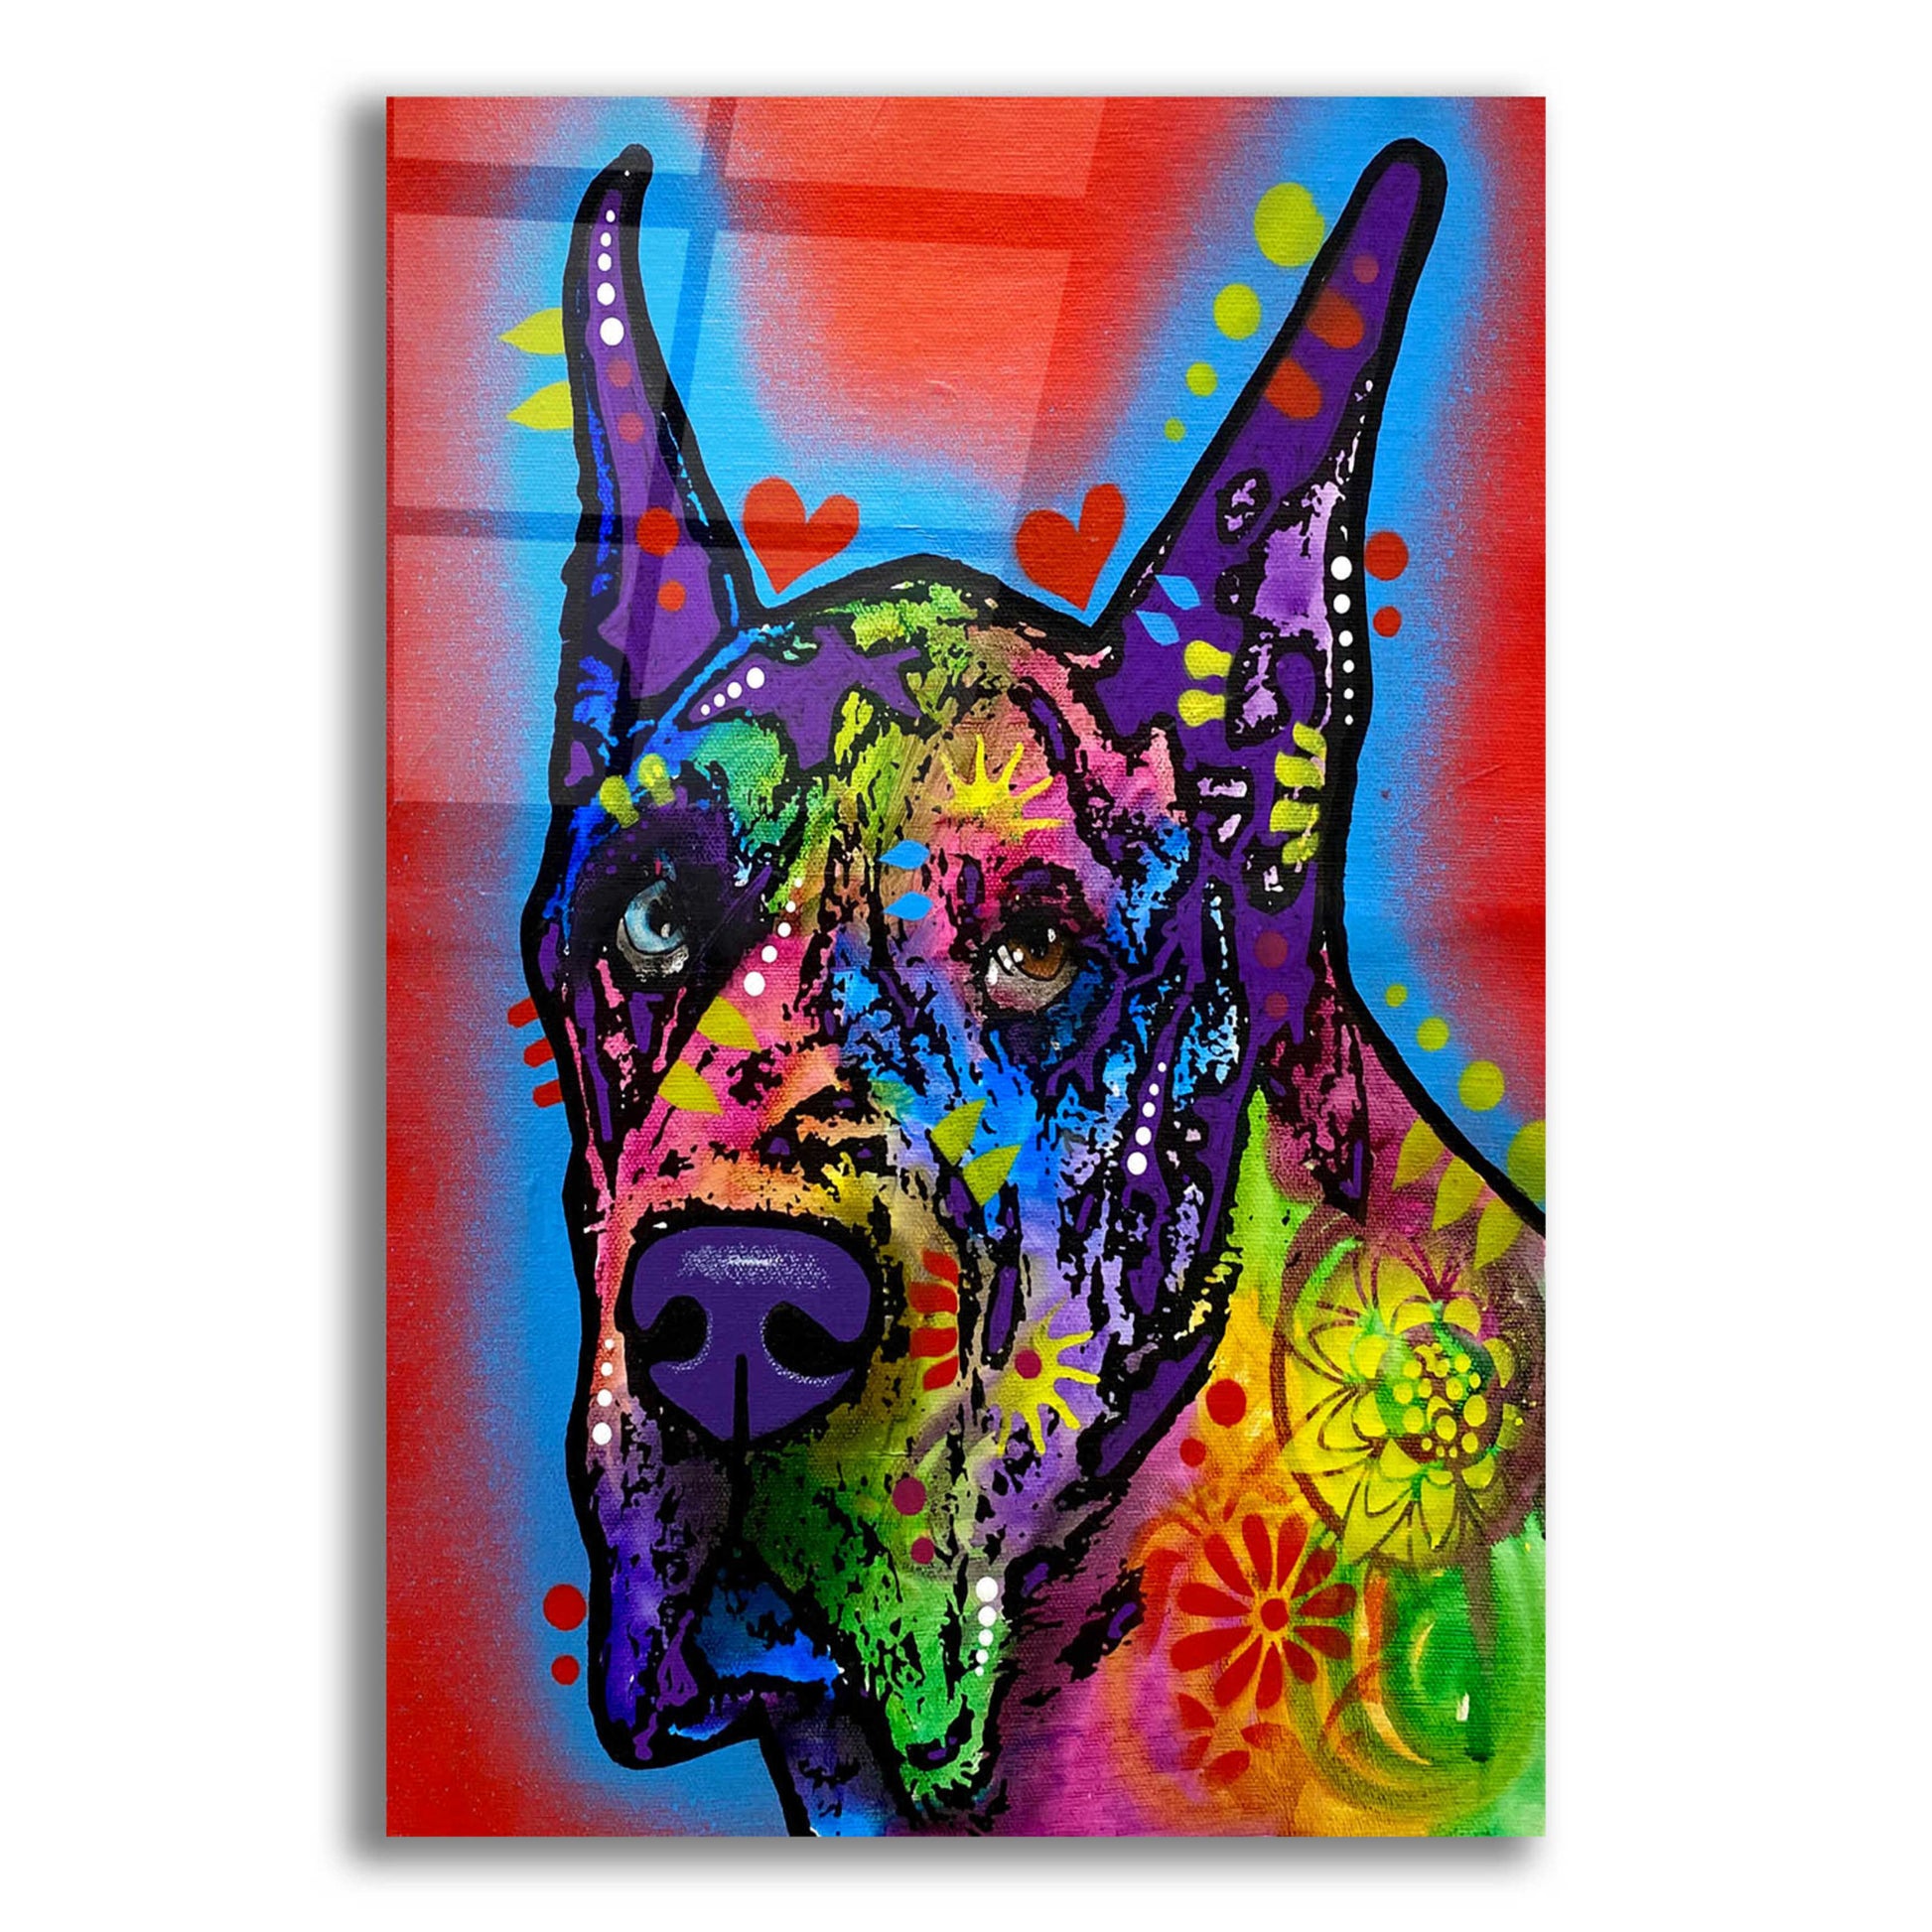 Epic Art 'Not This Again' by Dean Russo, Acrylic Glass Wall Art,12x16